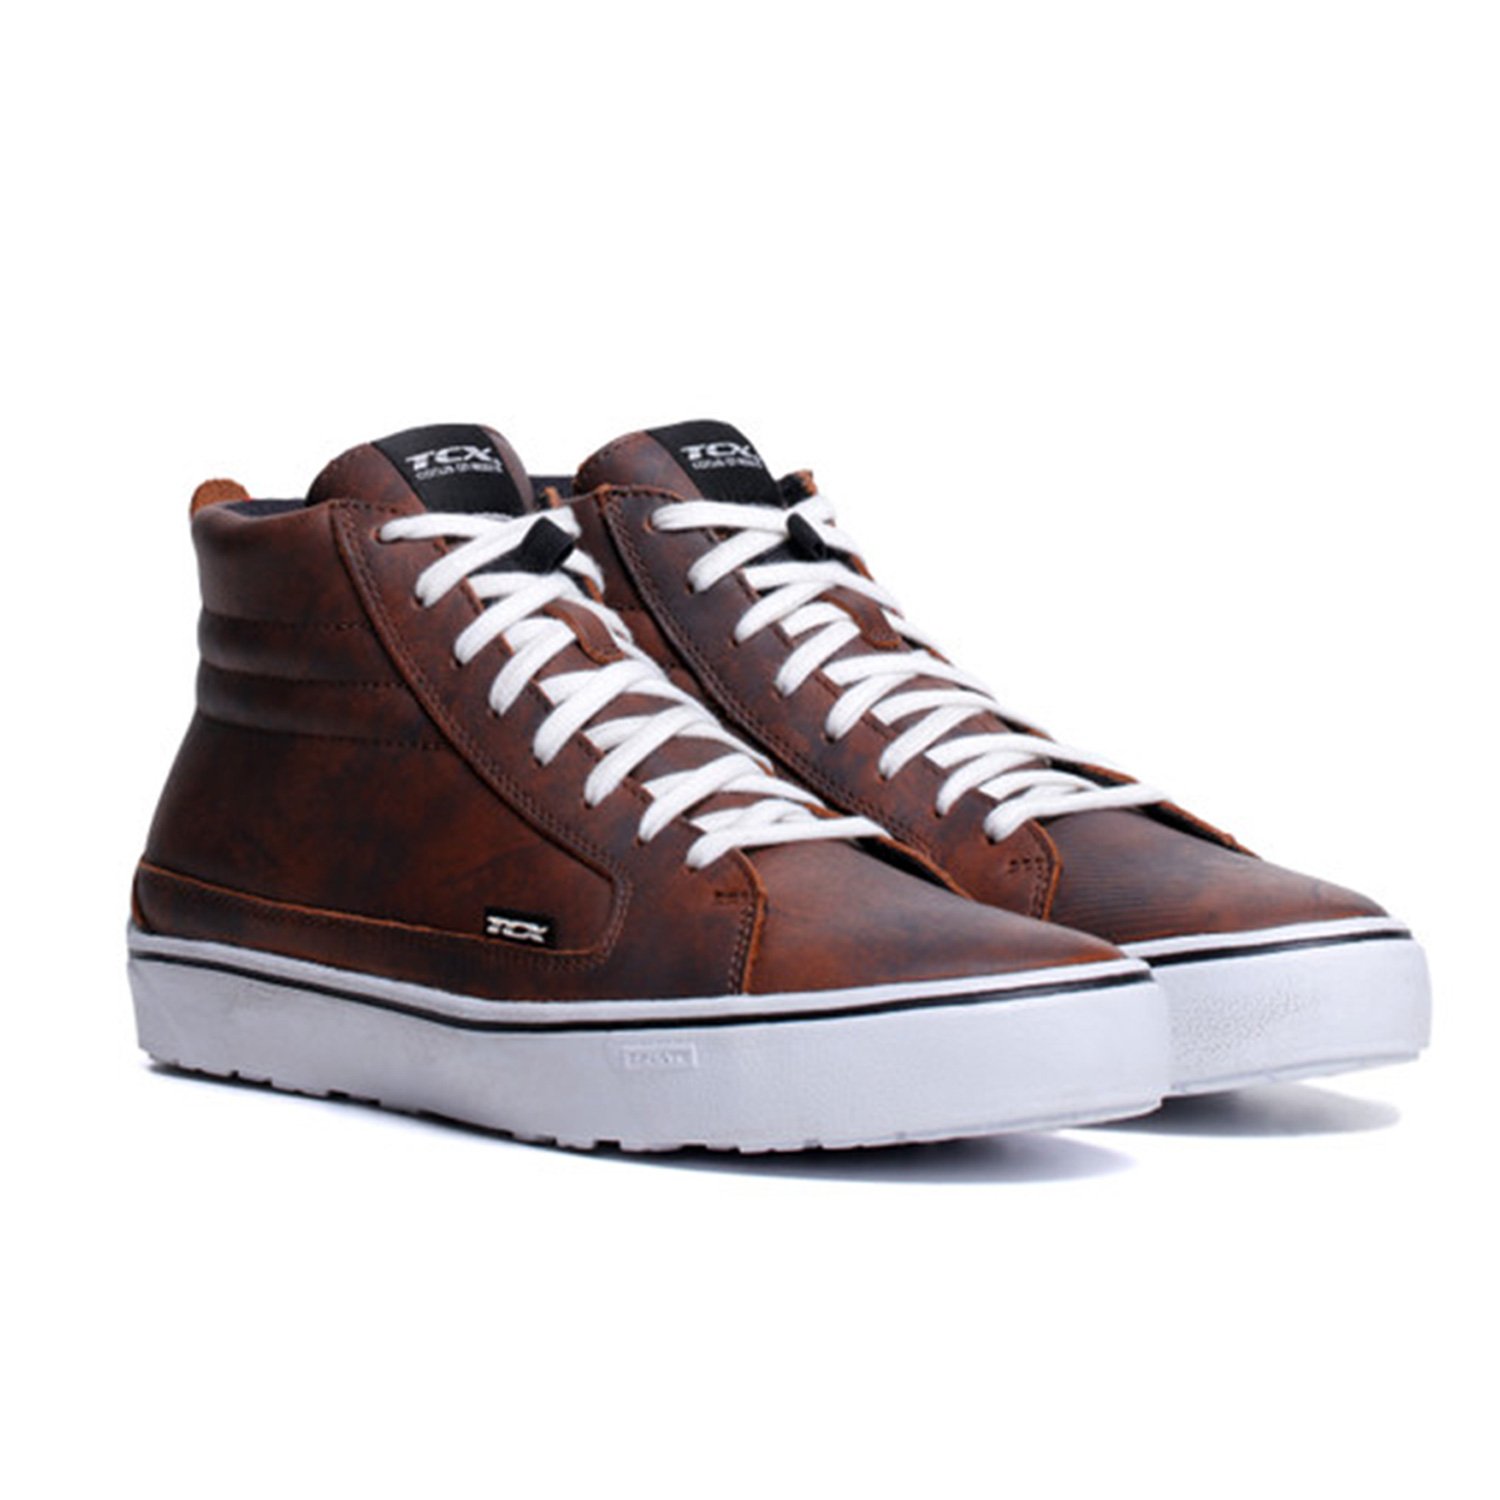 Image of EU TCX Street 3 WP Marron Blanc Chaussures Taille 38